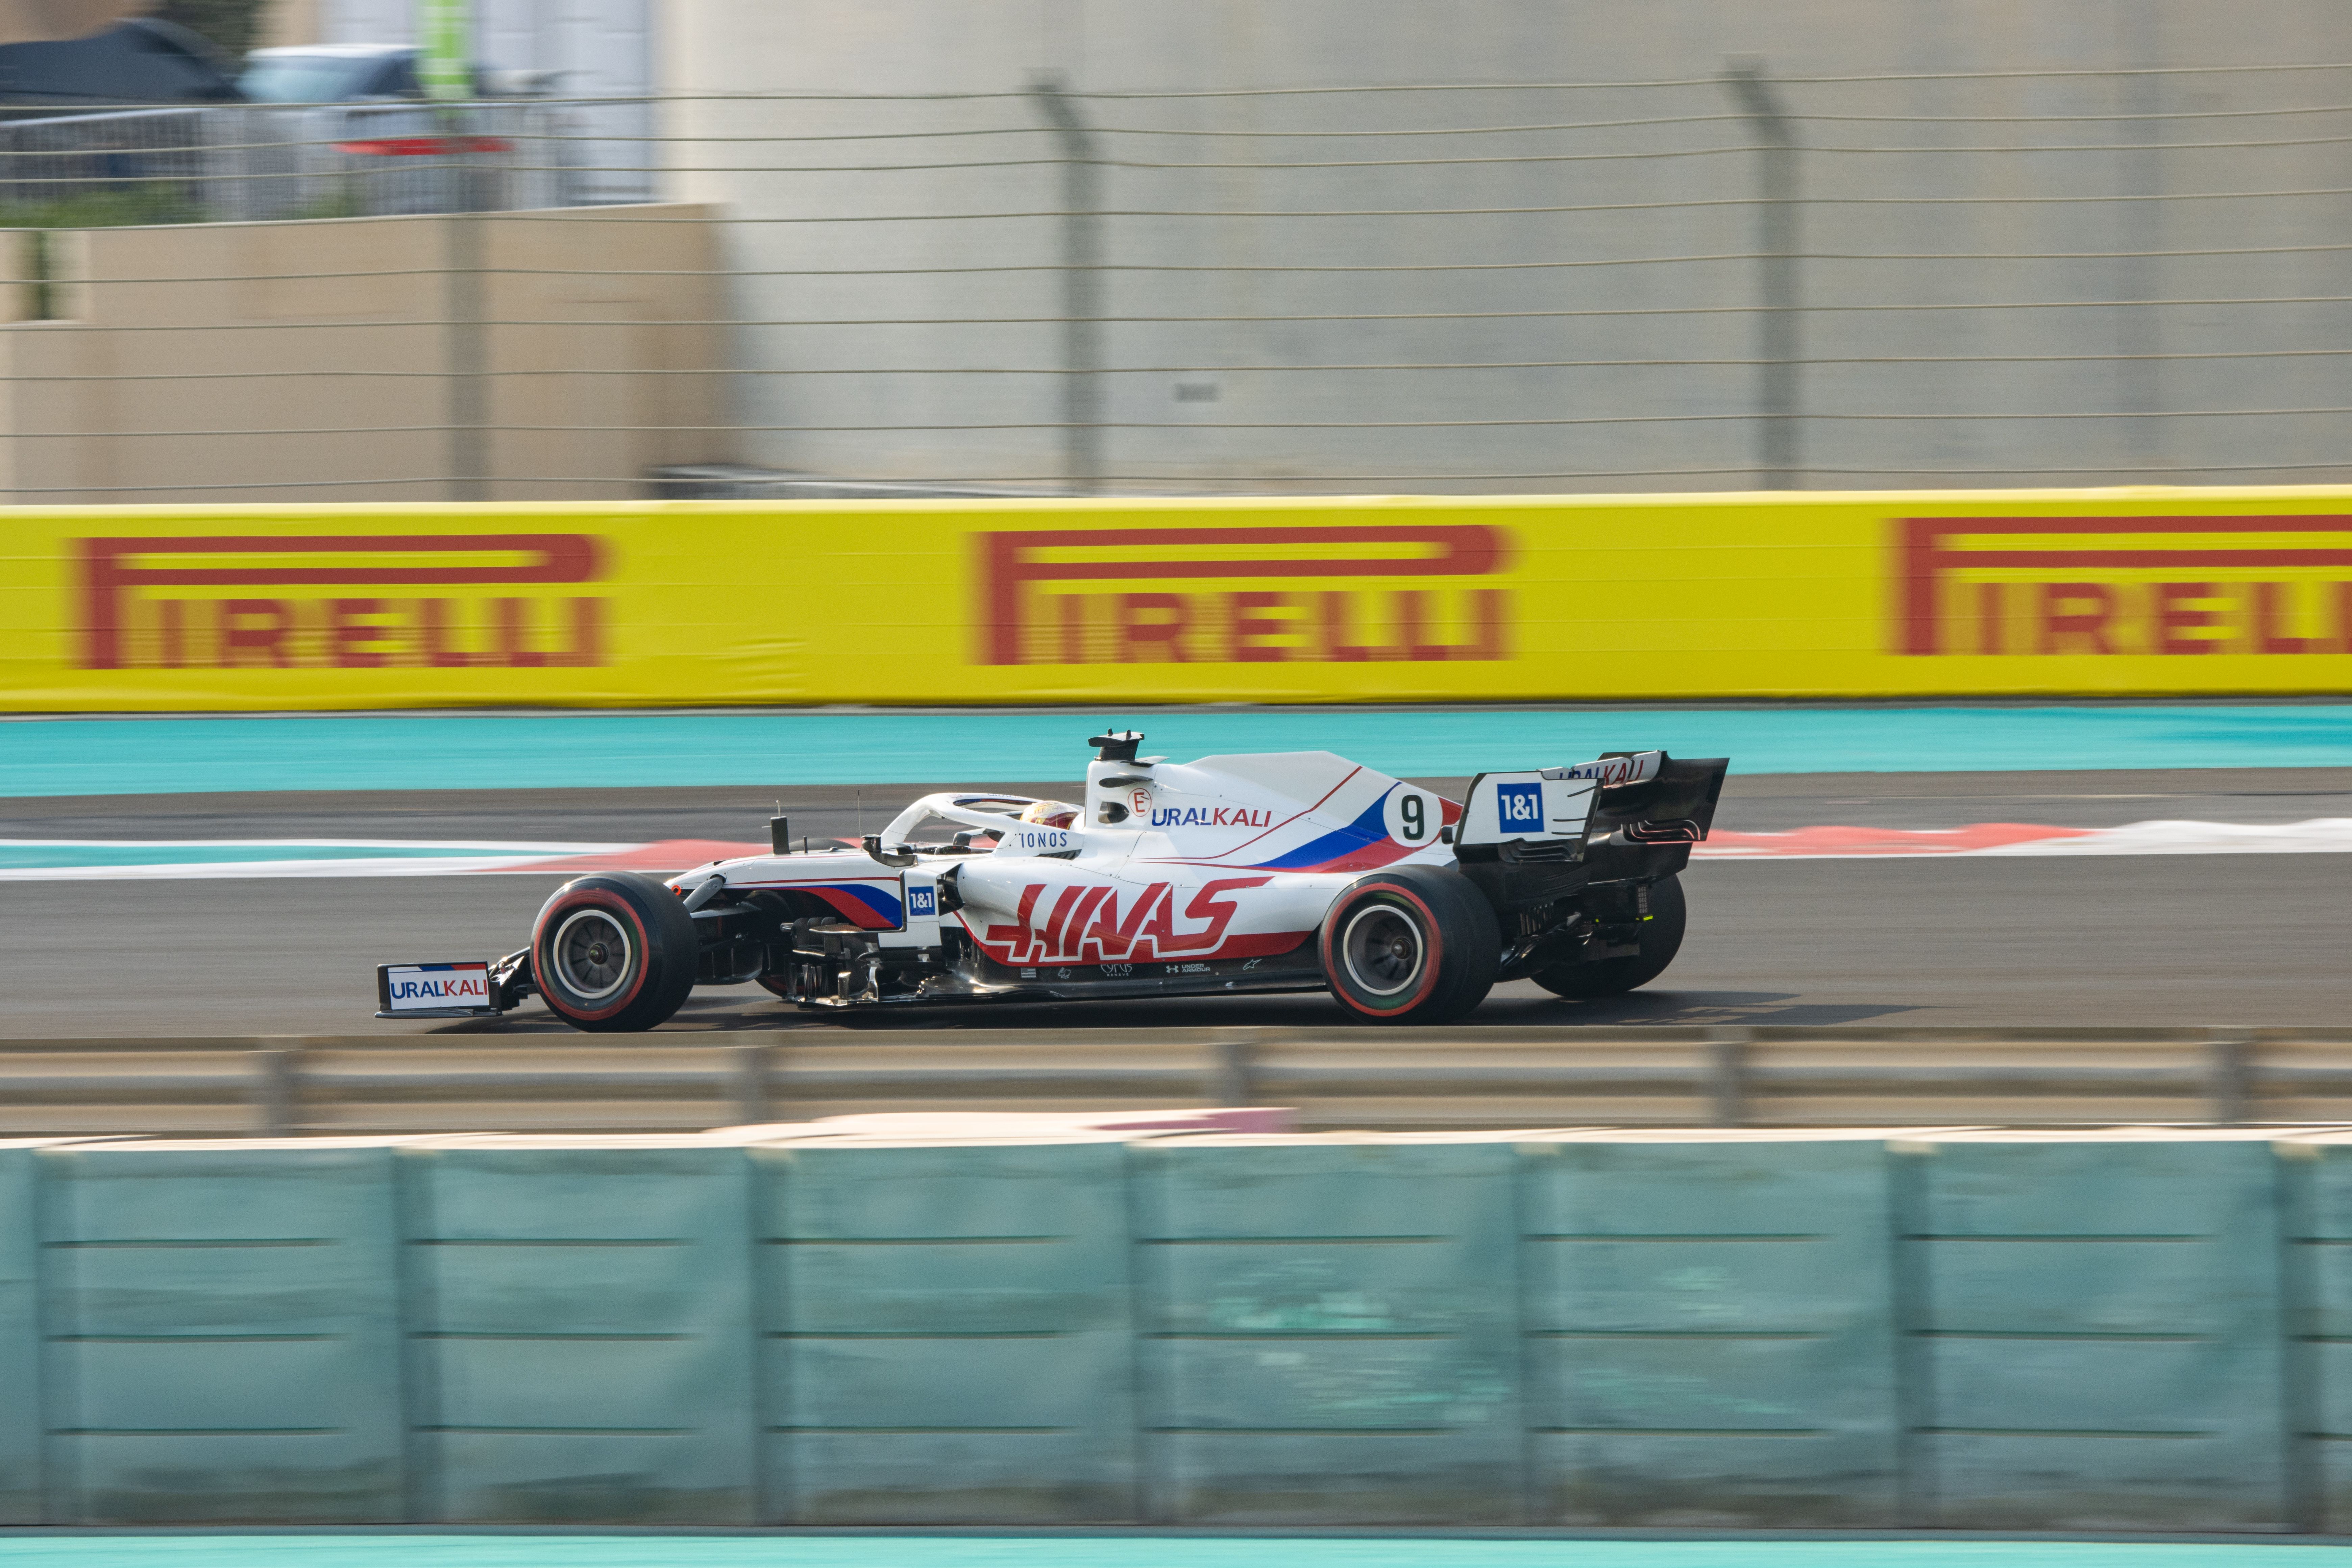 Nikita Mazepin at the Yas Marina Circuit, driving in FP3 for the Formula One finale in Abu Dhabi, 2021. His car is white with a red and blue livery, the team name "Haas" is written down the side. His car sports the number 9.